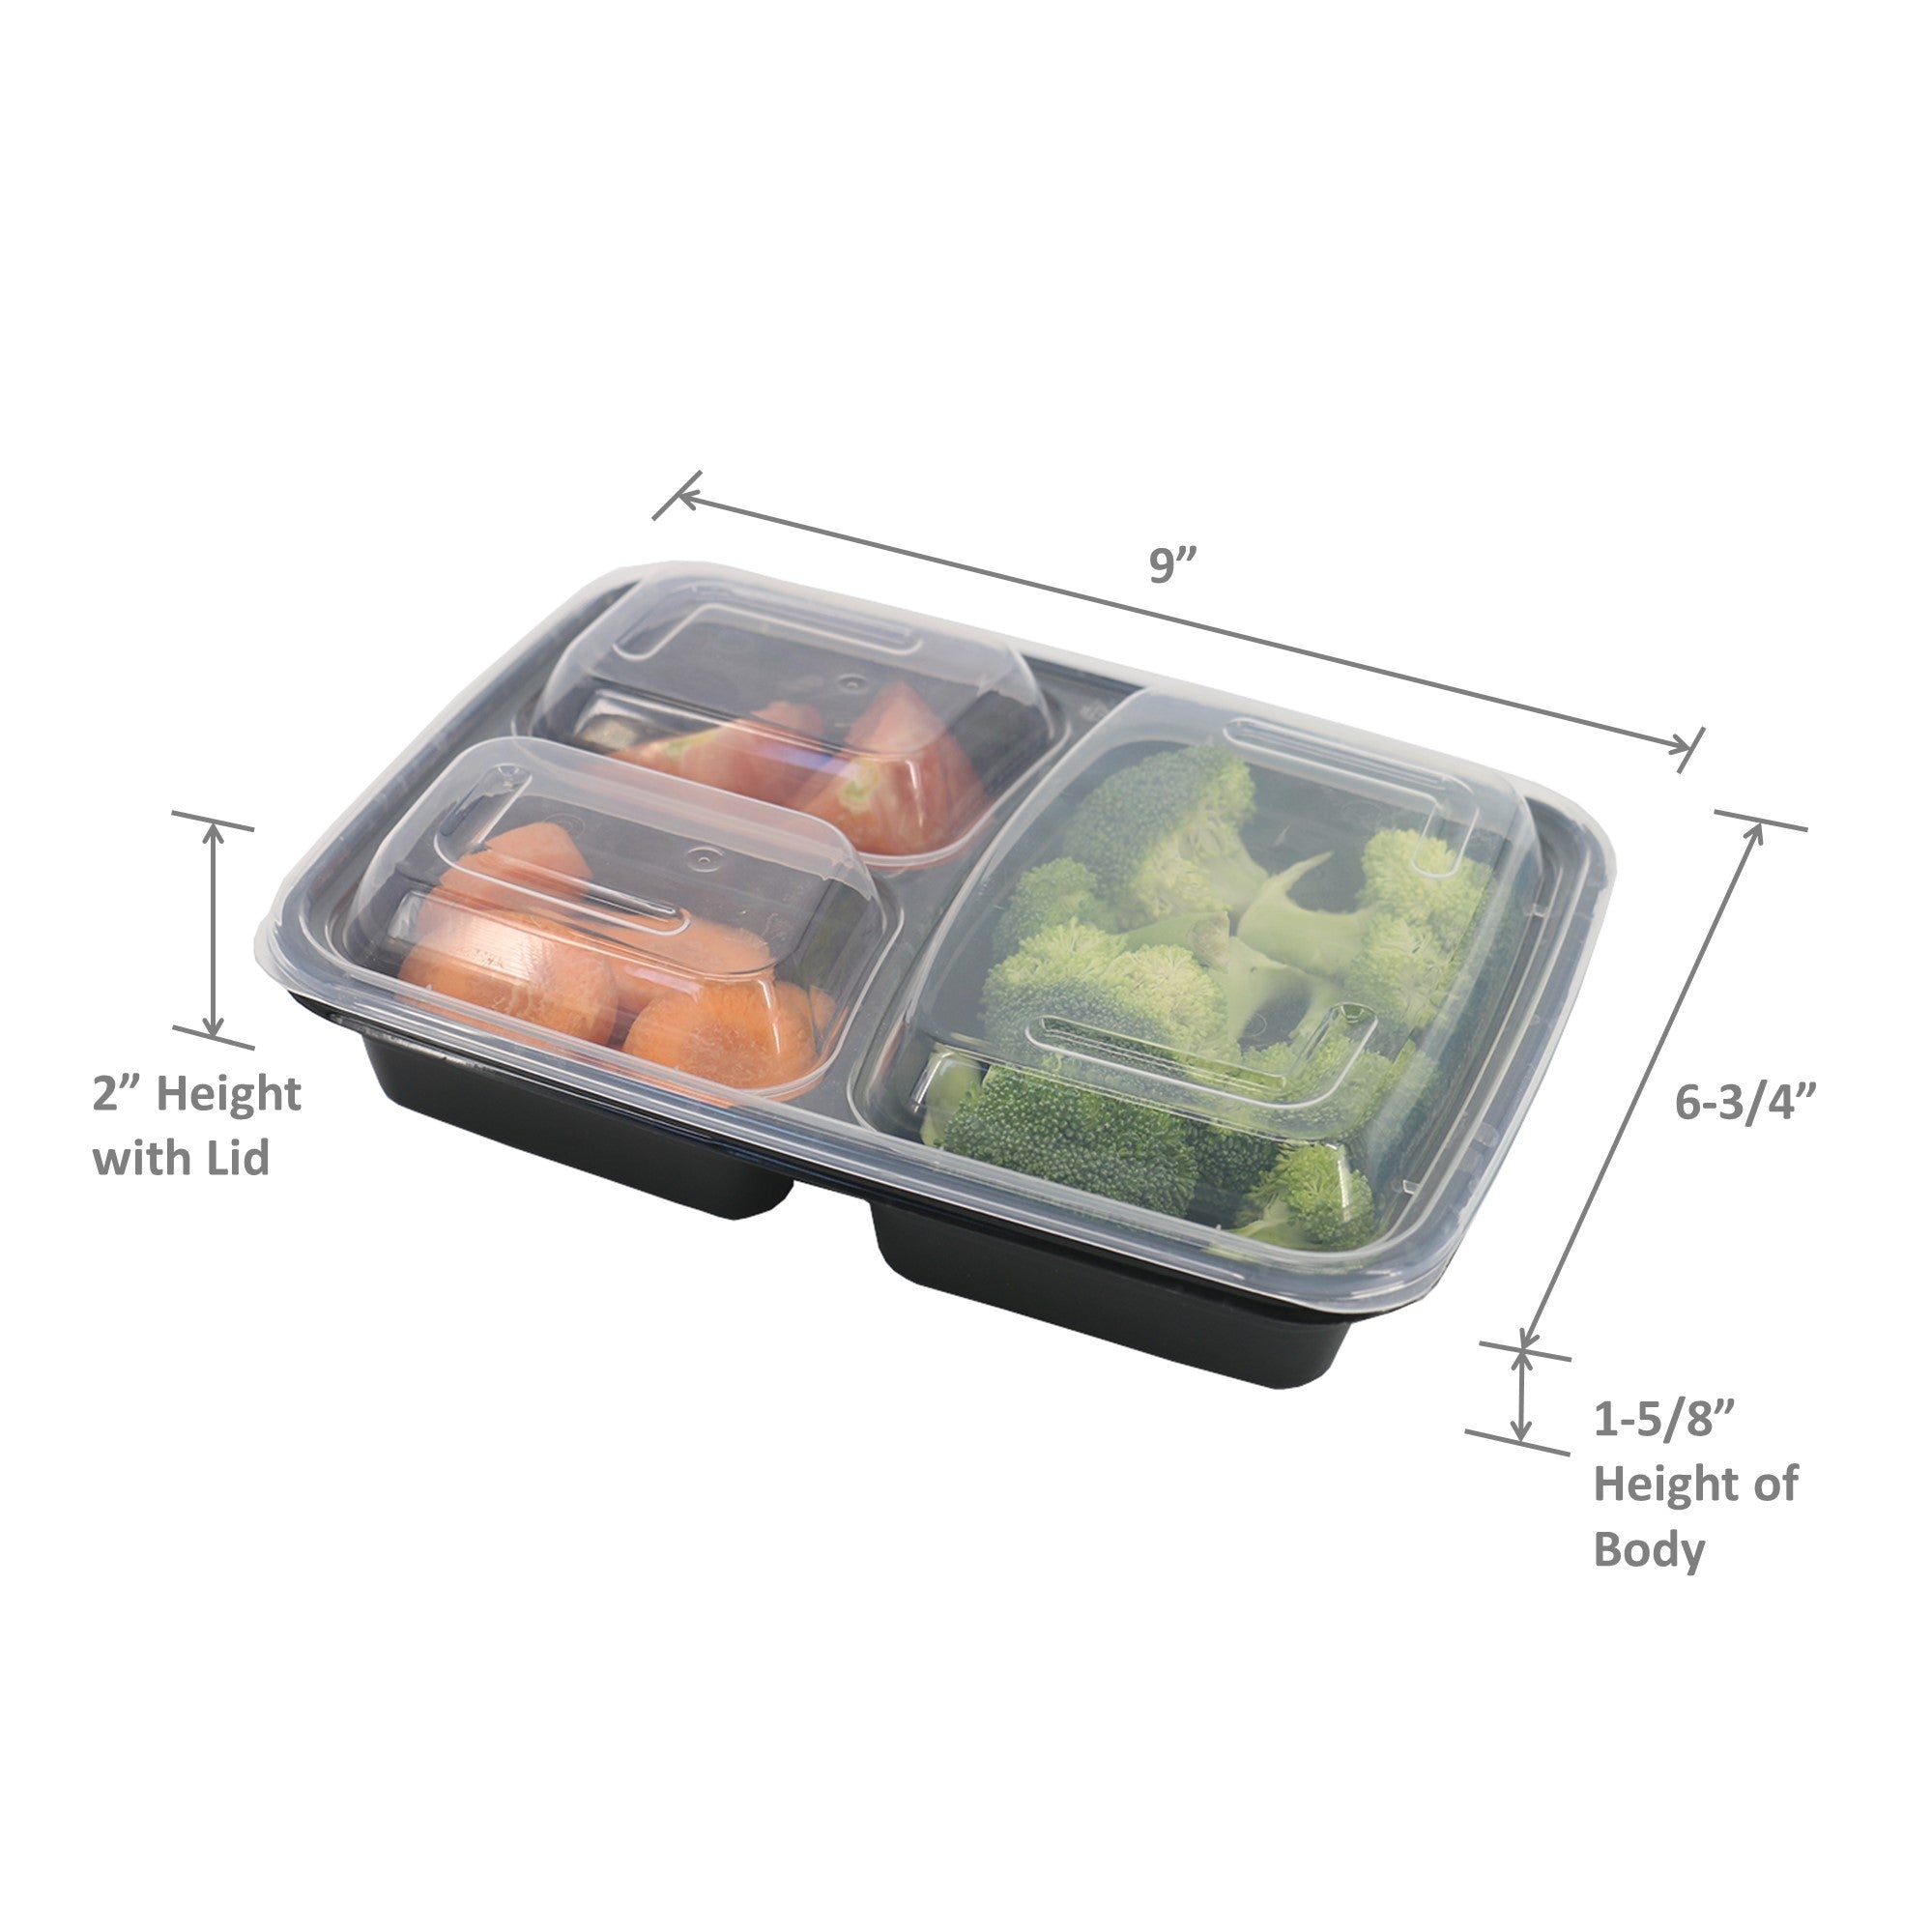 Goods that Give Eco-Friendly Lunch Bento Box - Wheat Straw, Stackable